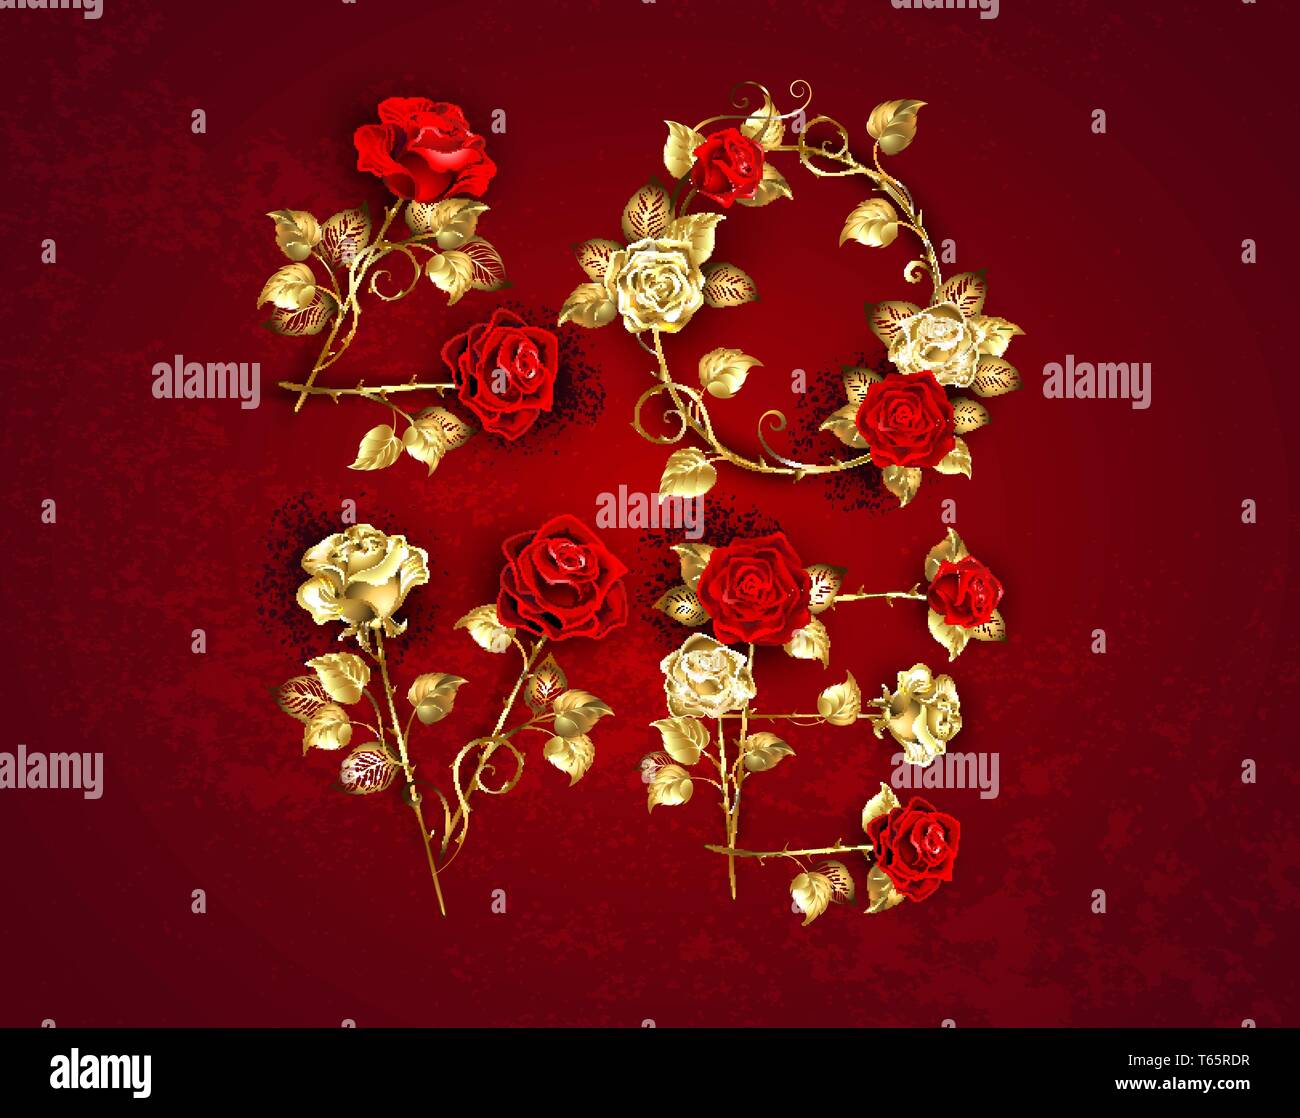 Creative inscription love from jewelry gold and red roses with straight stems on textured background. Stock Vector